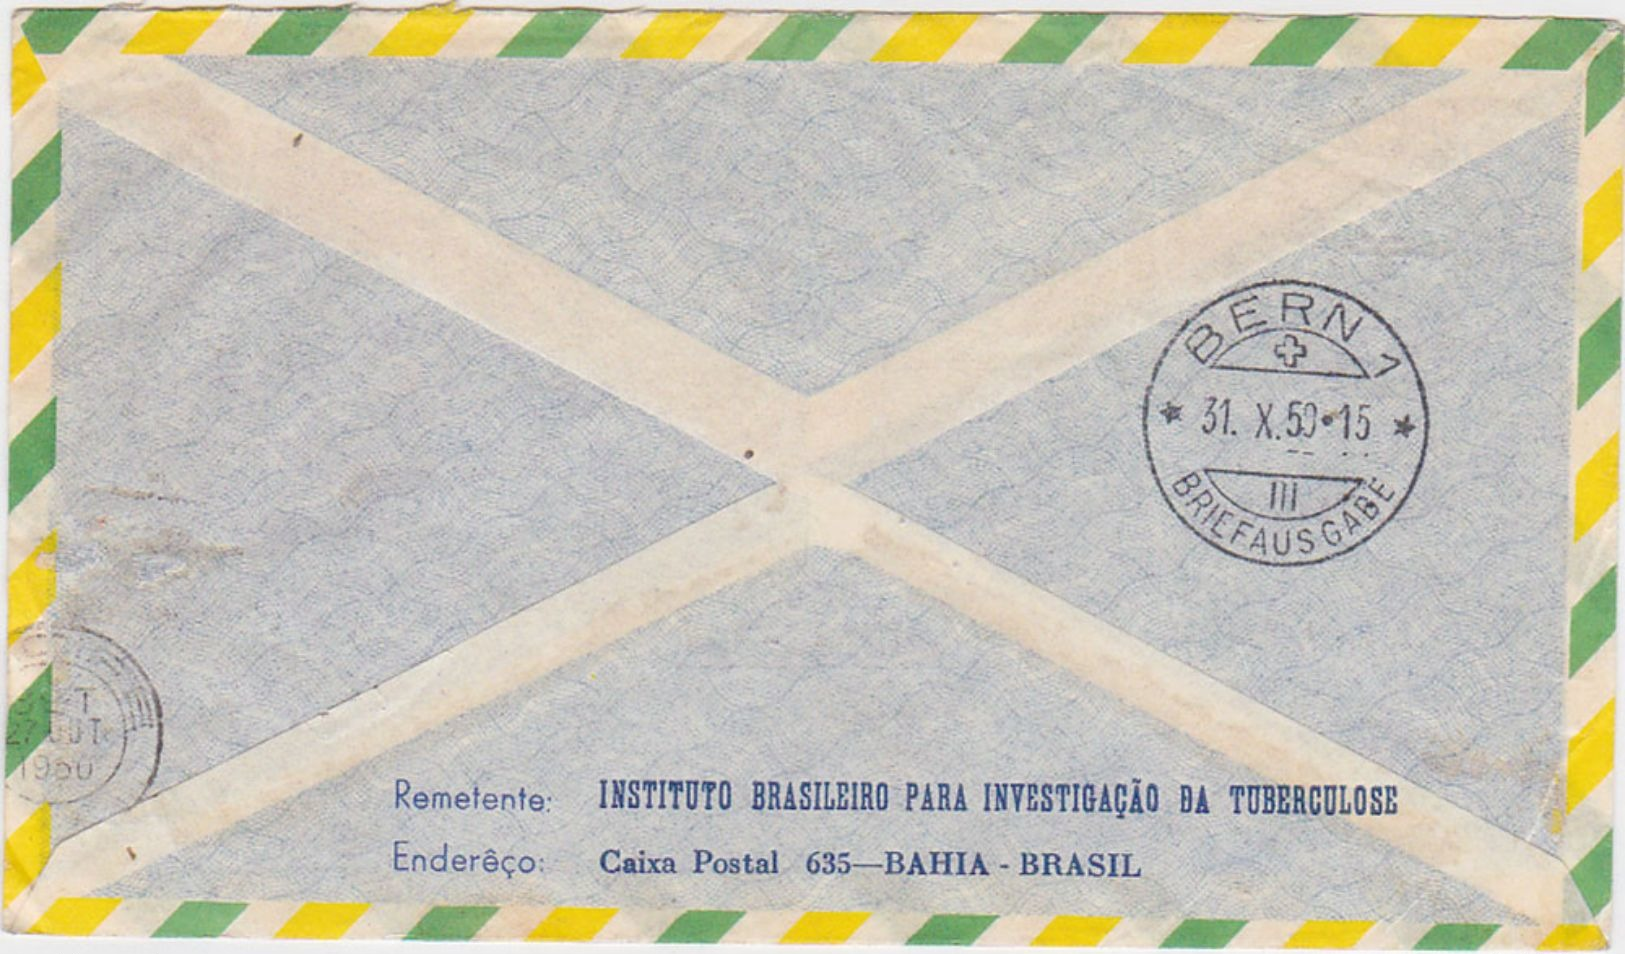 BRAZIL 1950 REG.AIRMAIL COVER BAHIA (Tuberculosis Research) TO SWITZERLAND - Other